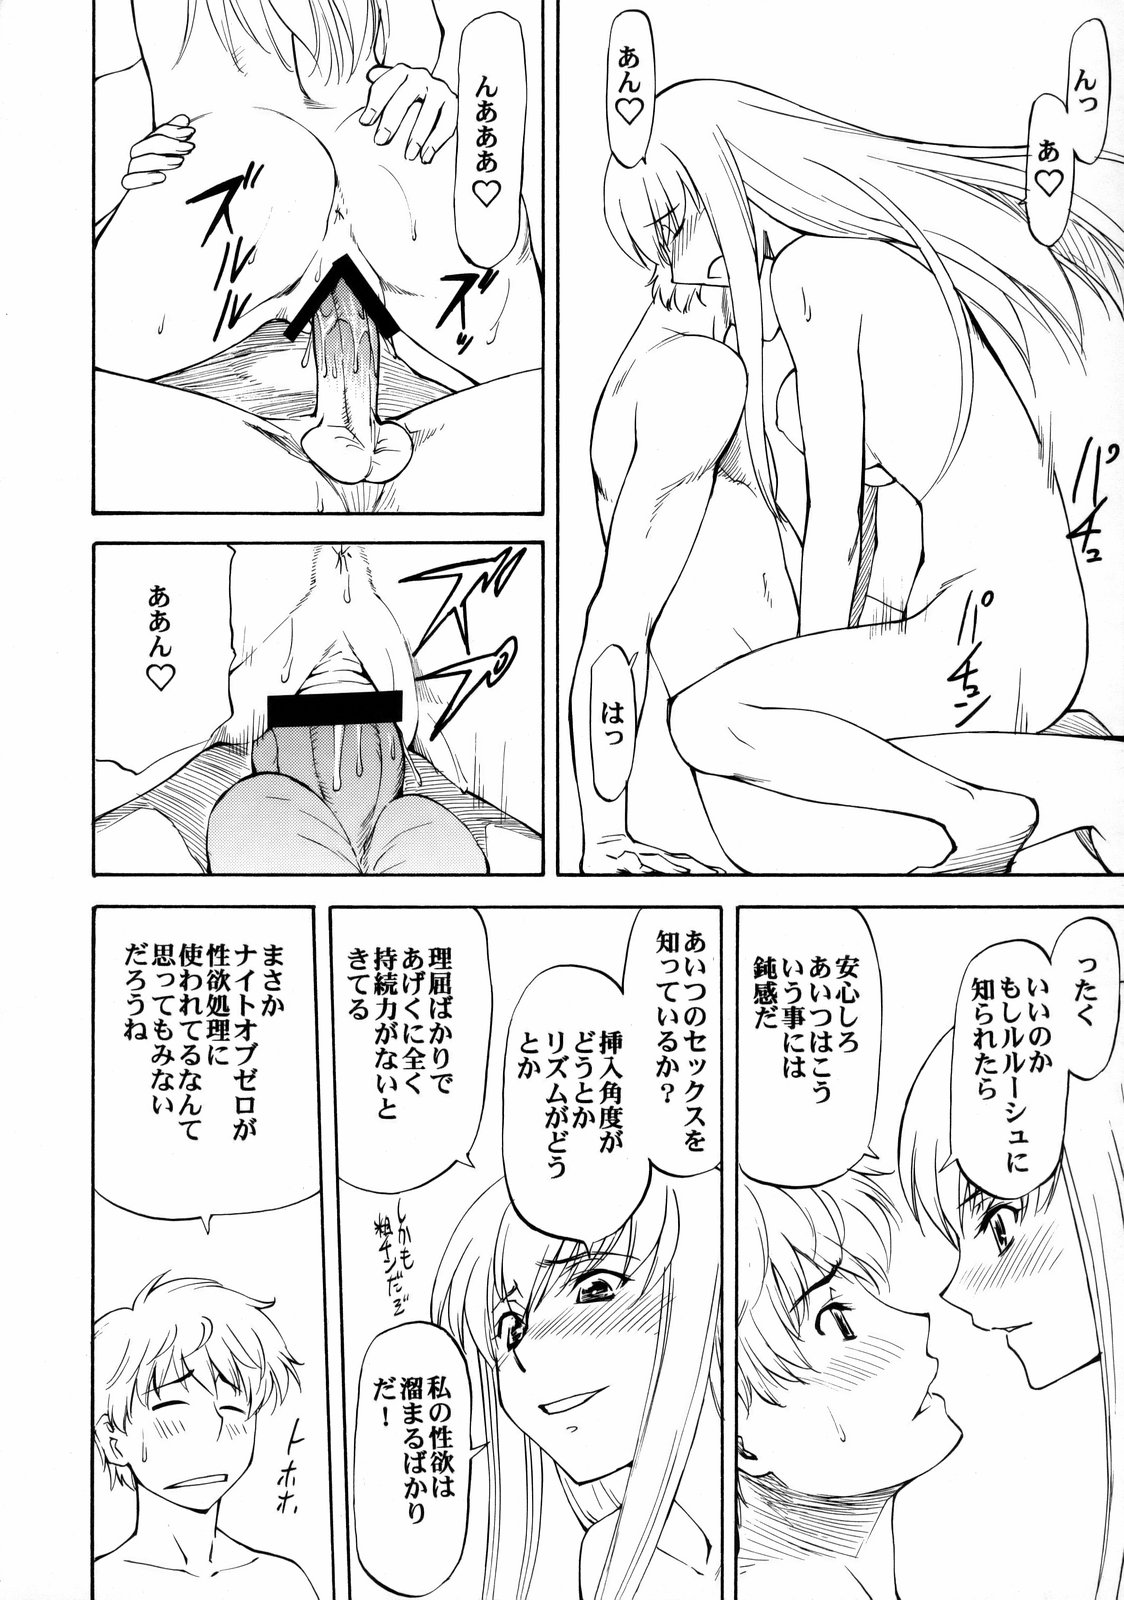 (C75) [Leaf Party (Nagare Ippon)] LeLe Pappa Vol. 14 Megumiruku (CODE GEASS: Lelouch of the Rebellion) page 7 full